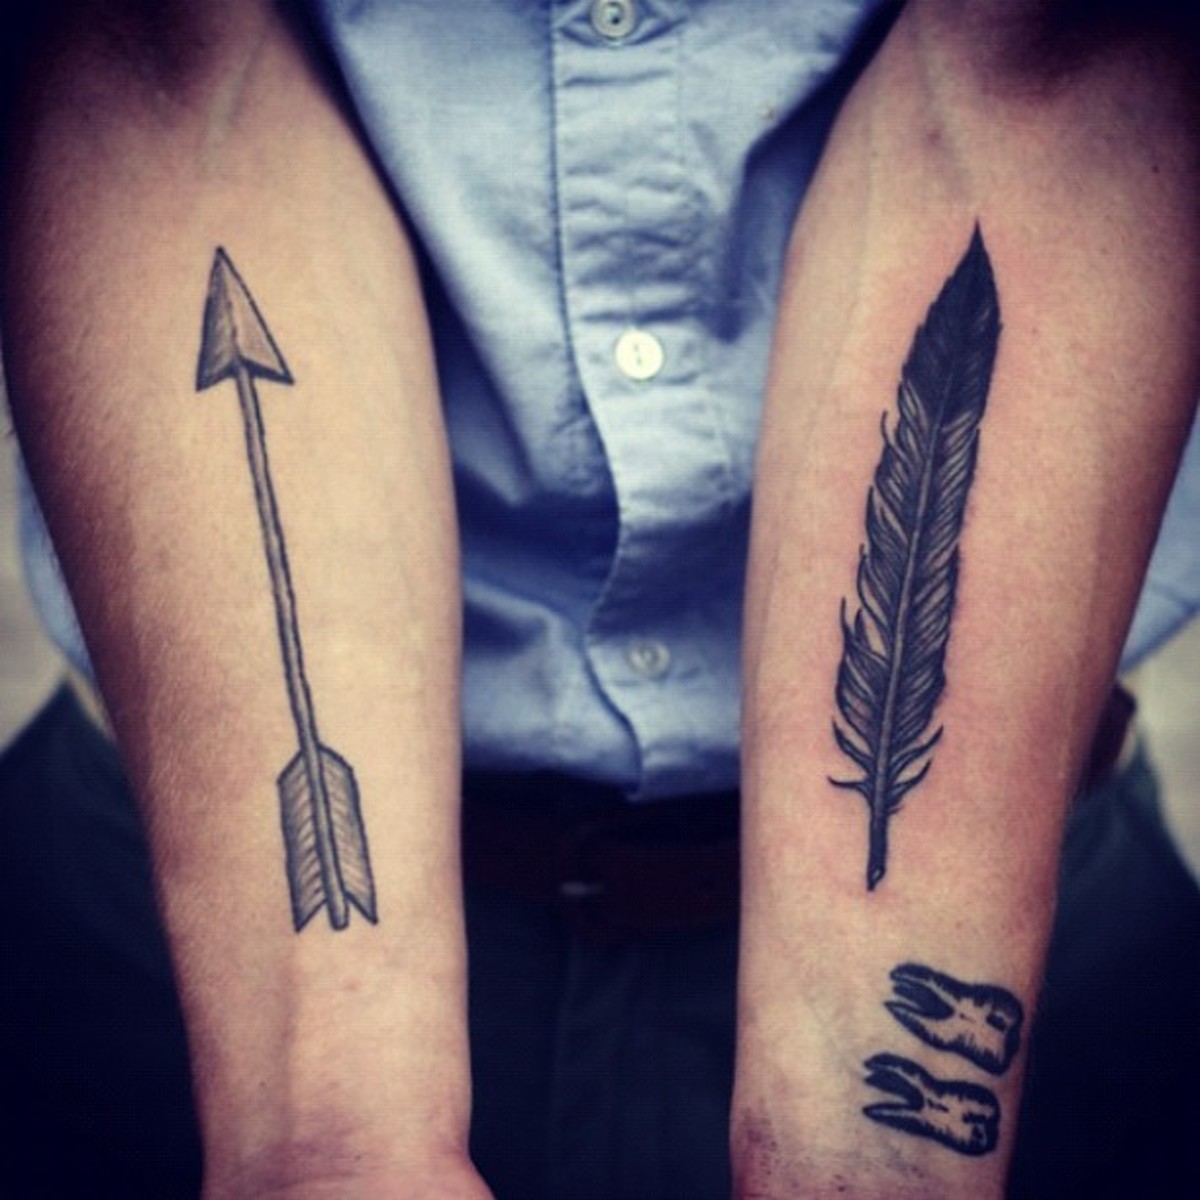 31 Simple Yet Striking Tattoos And What They Mean